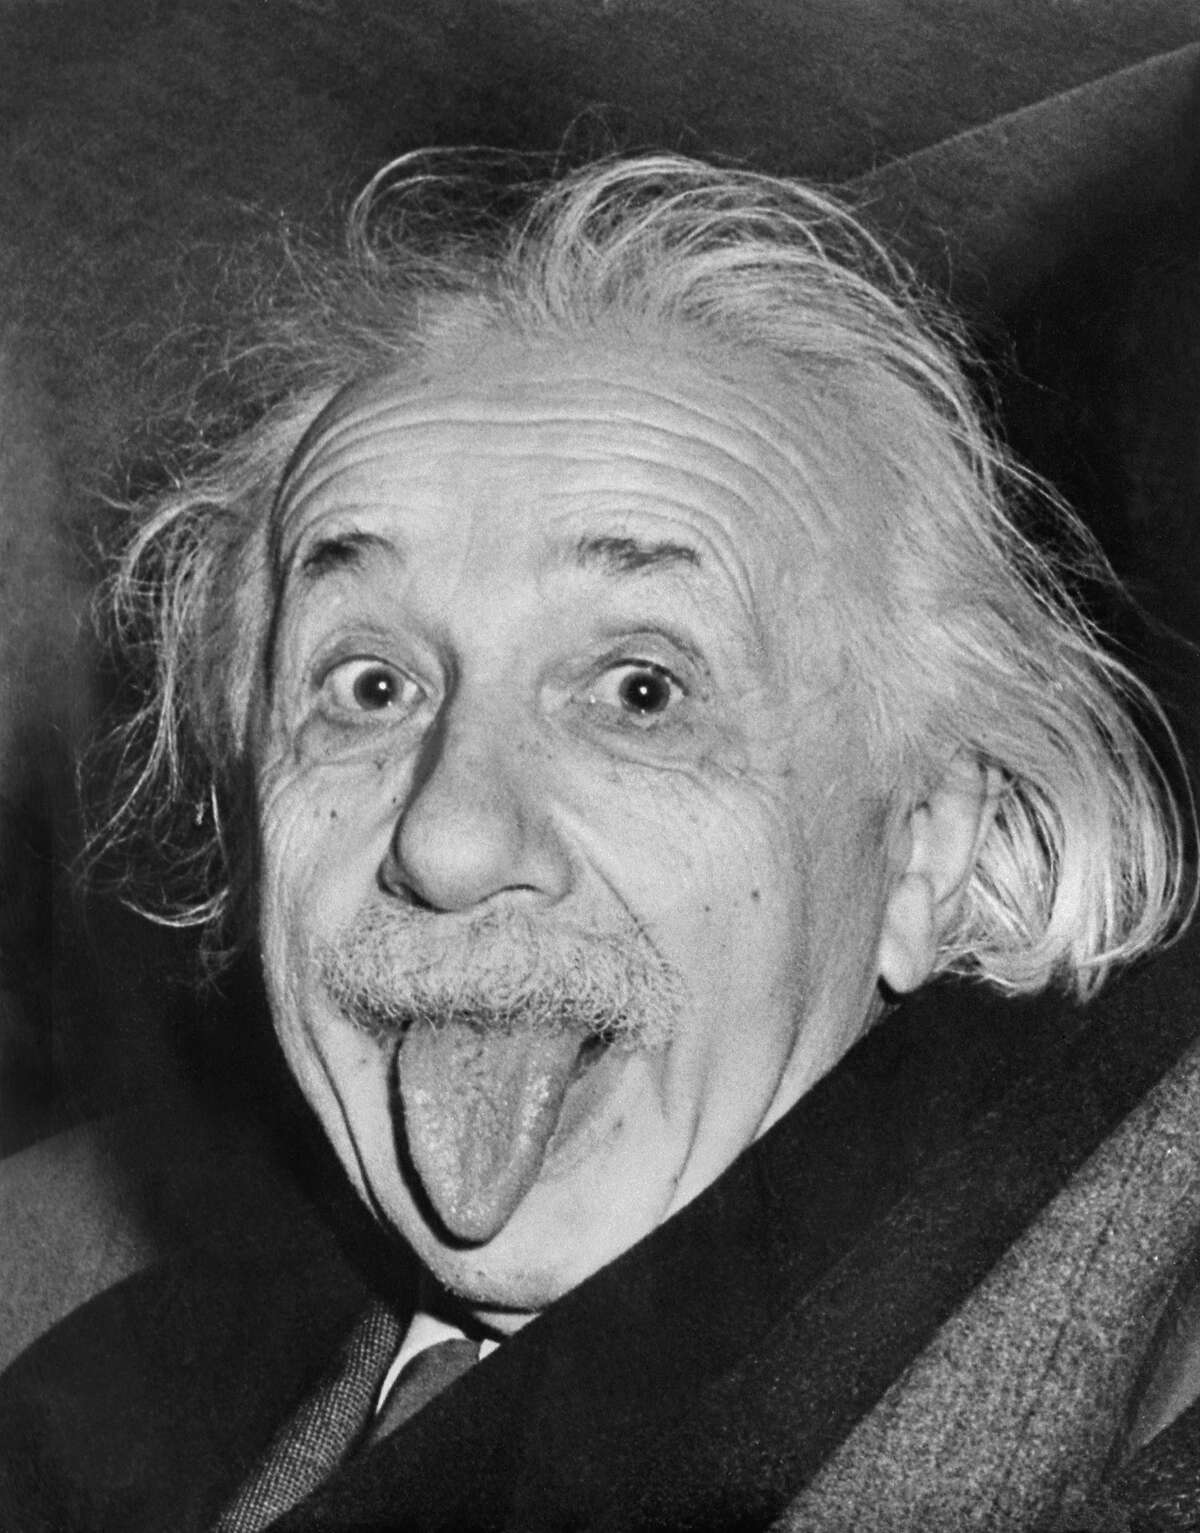 Celebrated picture dated 18 march 1951, shows German-born Swiss-US physicist Albert Einstein (1879-1955), awarded the Nobel Prize for Physics in 1921, sticking out his tongue at photographers on his 72nd birthday. AFP ARTHUR SASSE